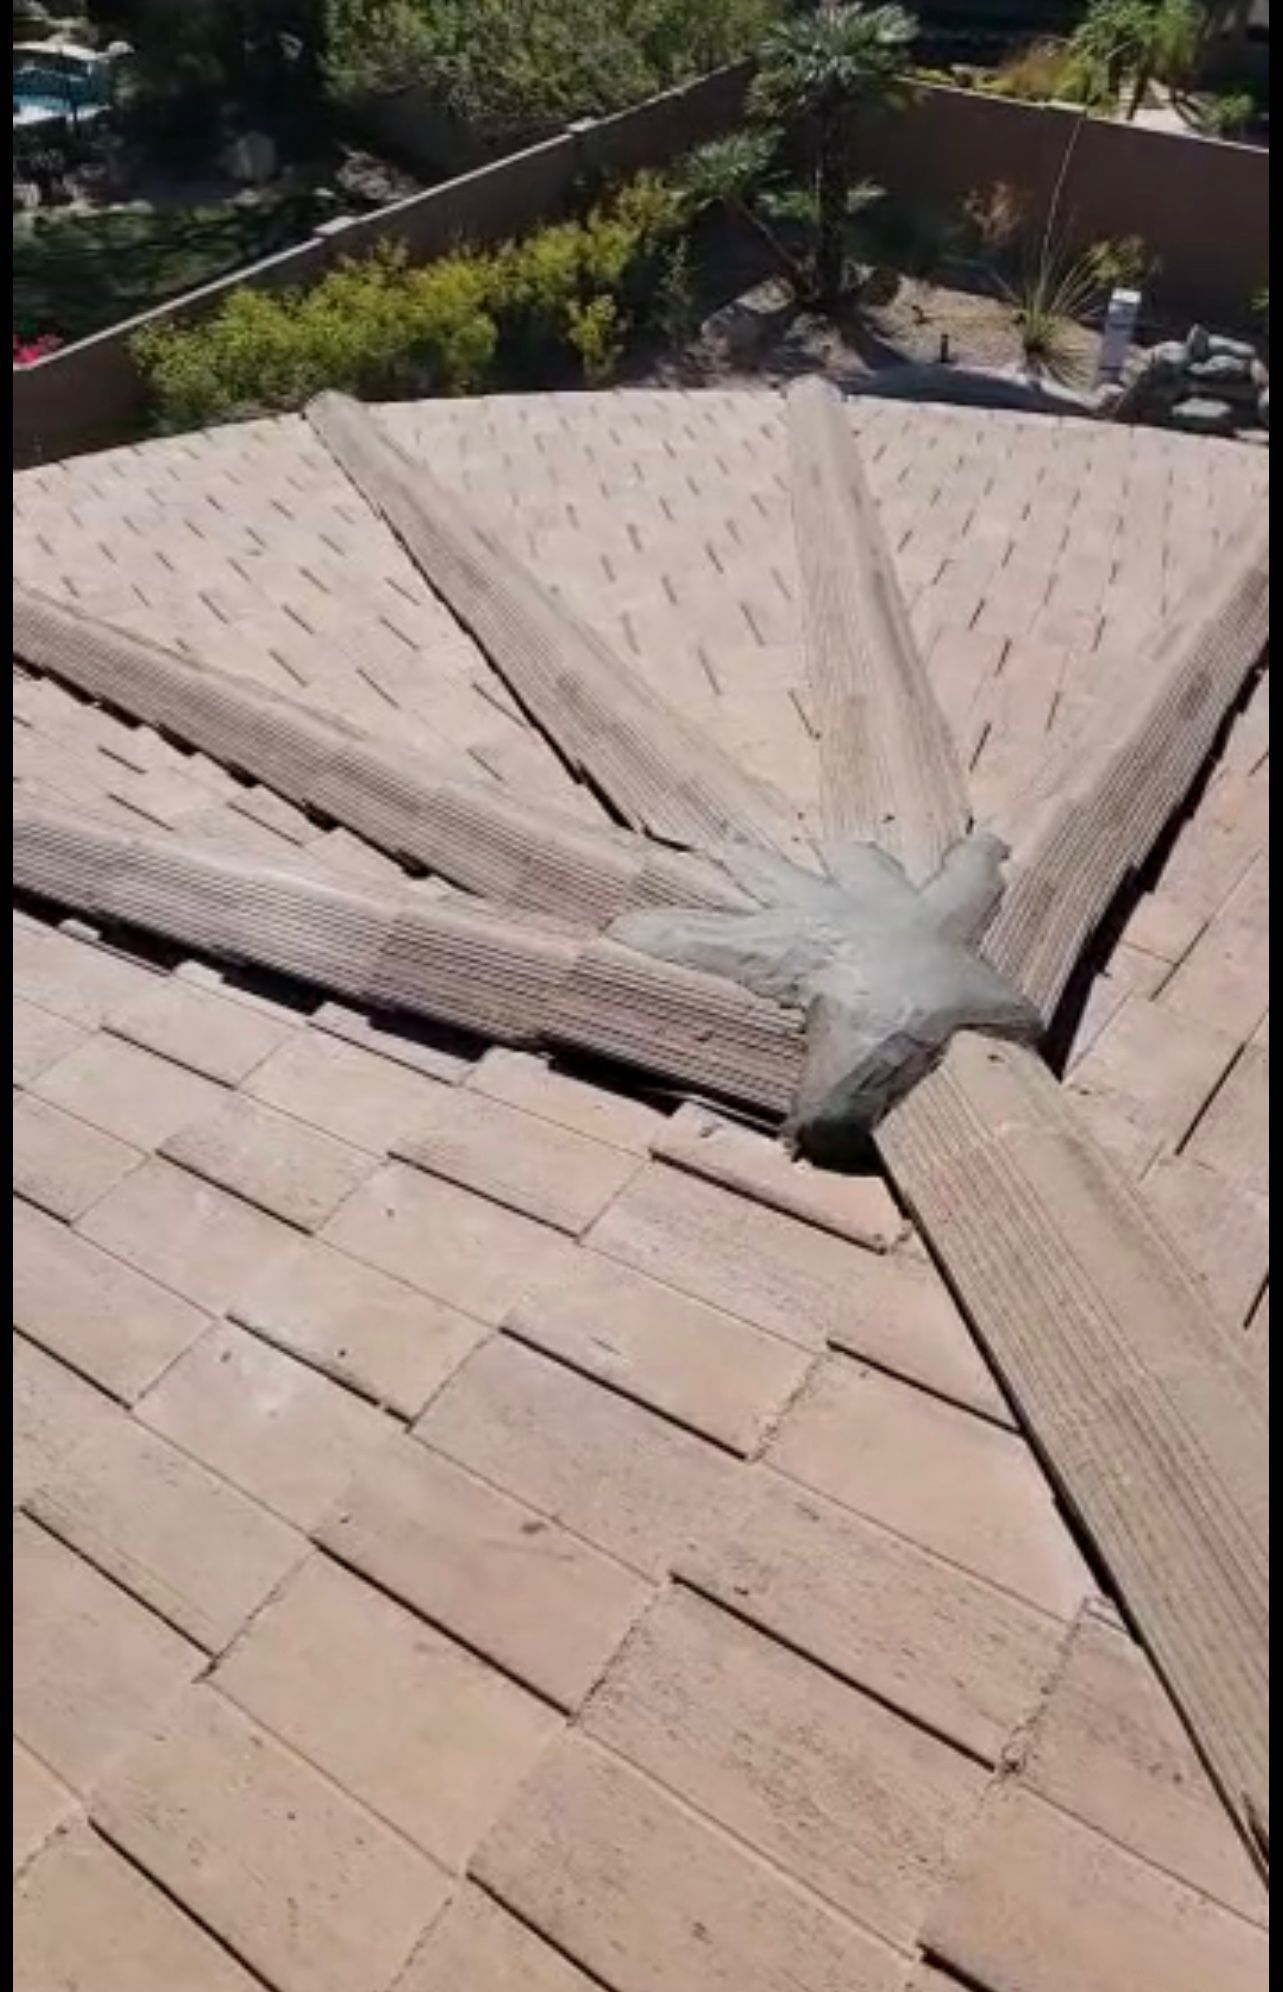 Close-up view of high-quality tiles used in a Scottsdale re-roofing project.